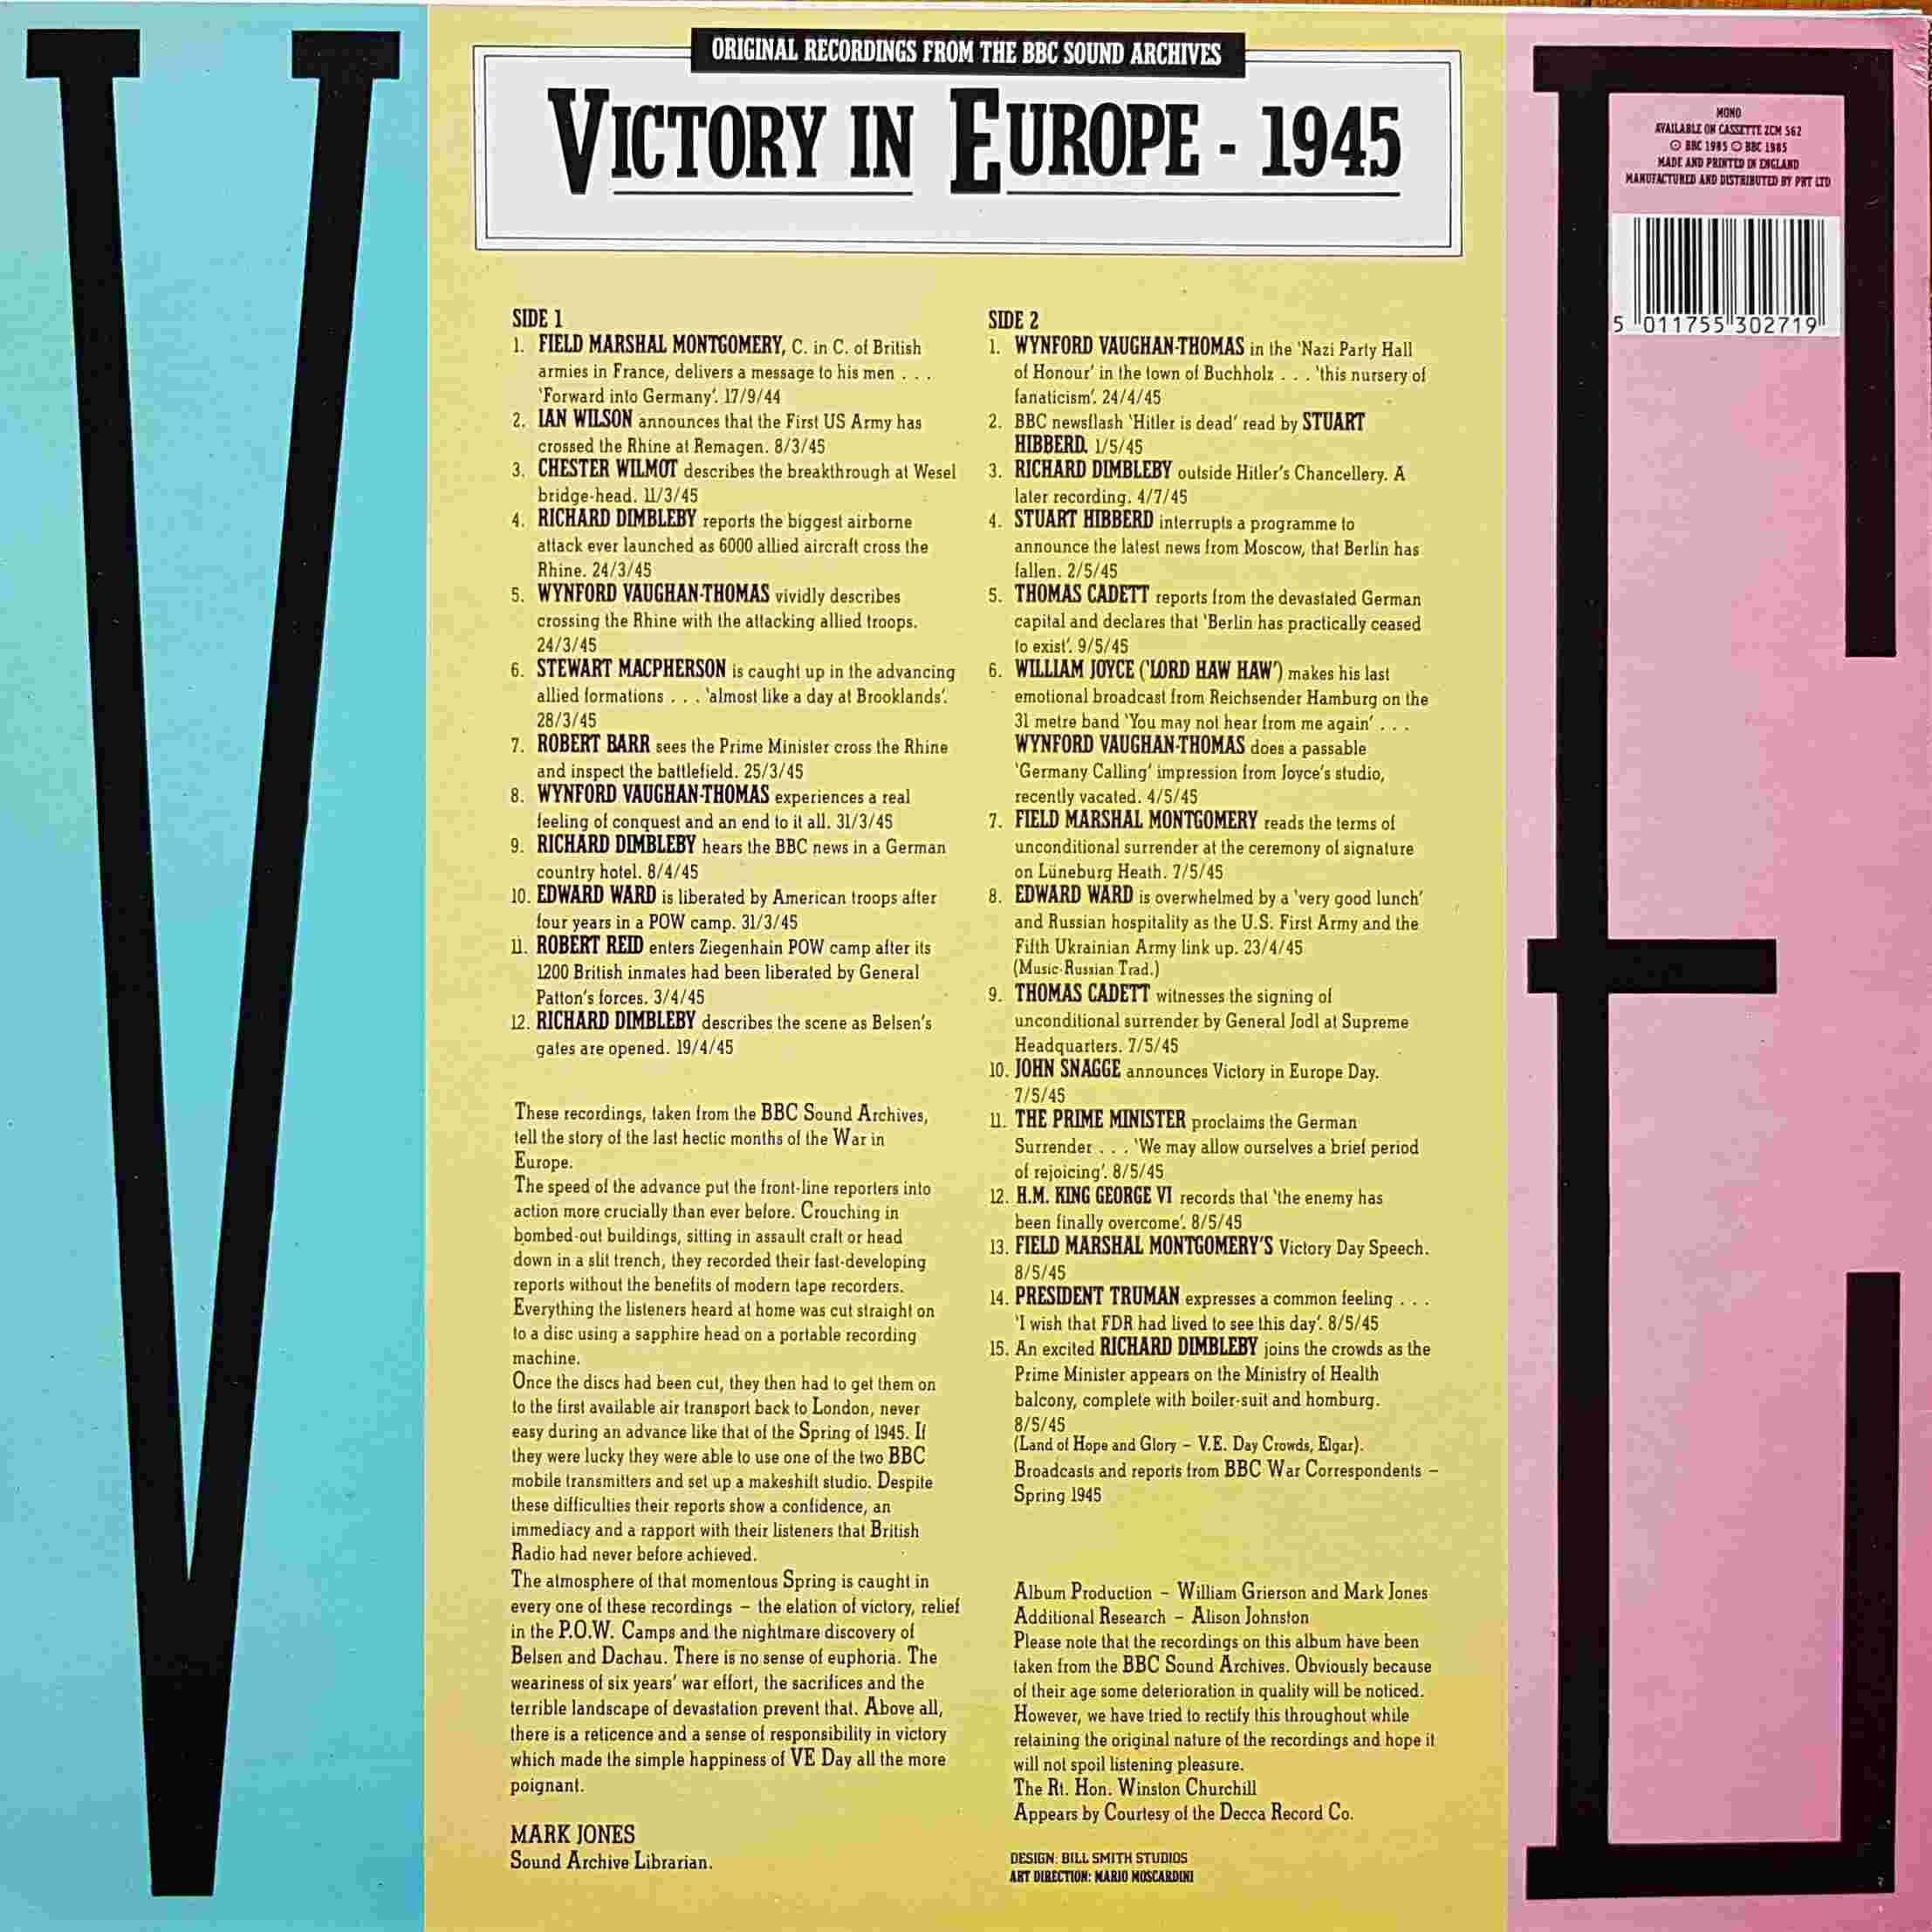 Picture of REC 562 Victory in Europe - 1945 by artist Various from the BBC records and Tapes library